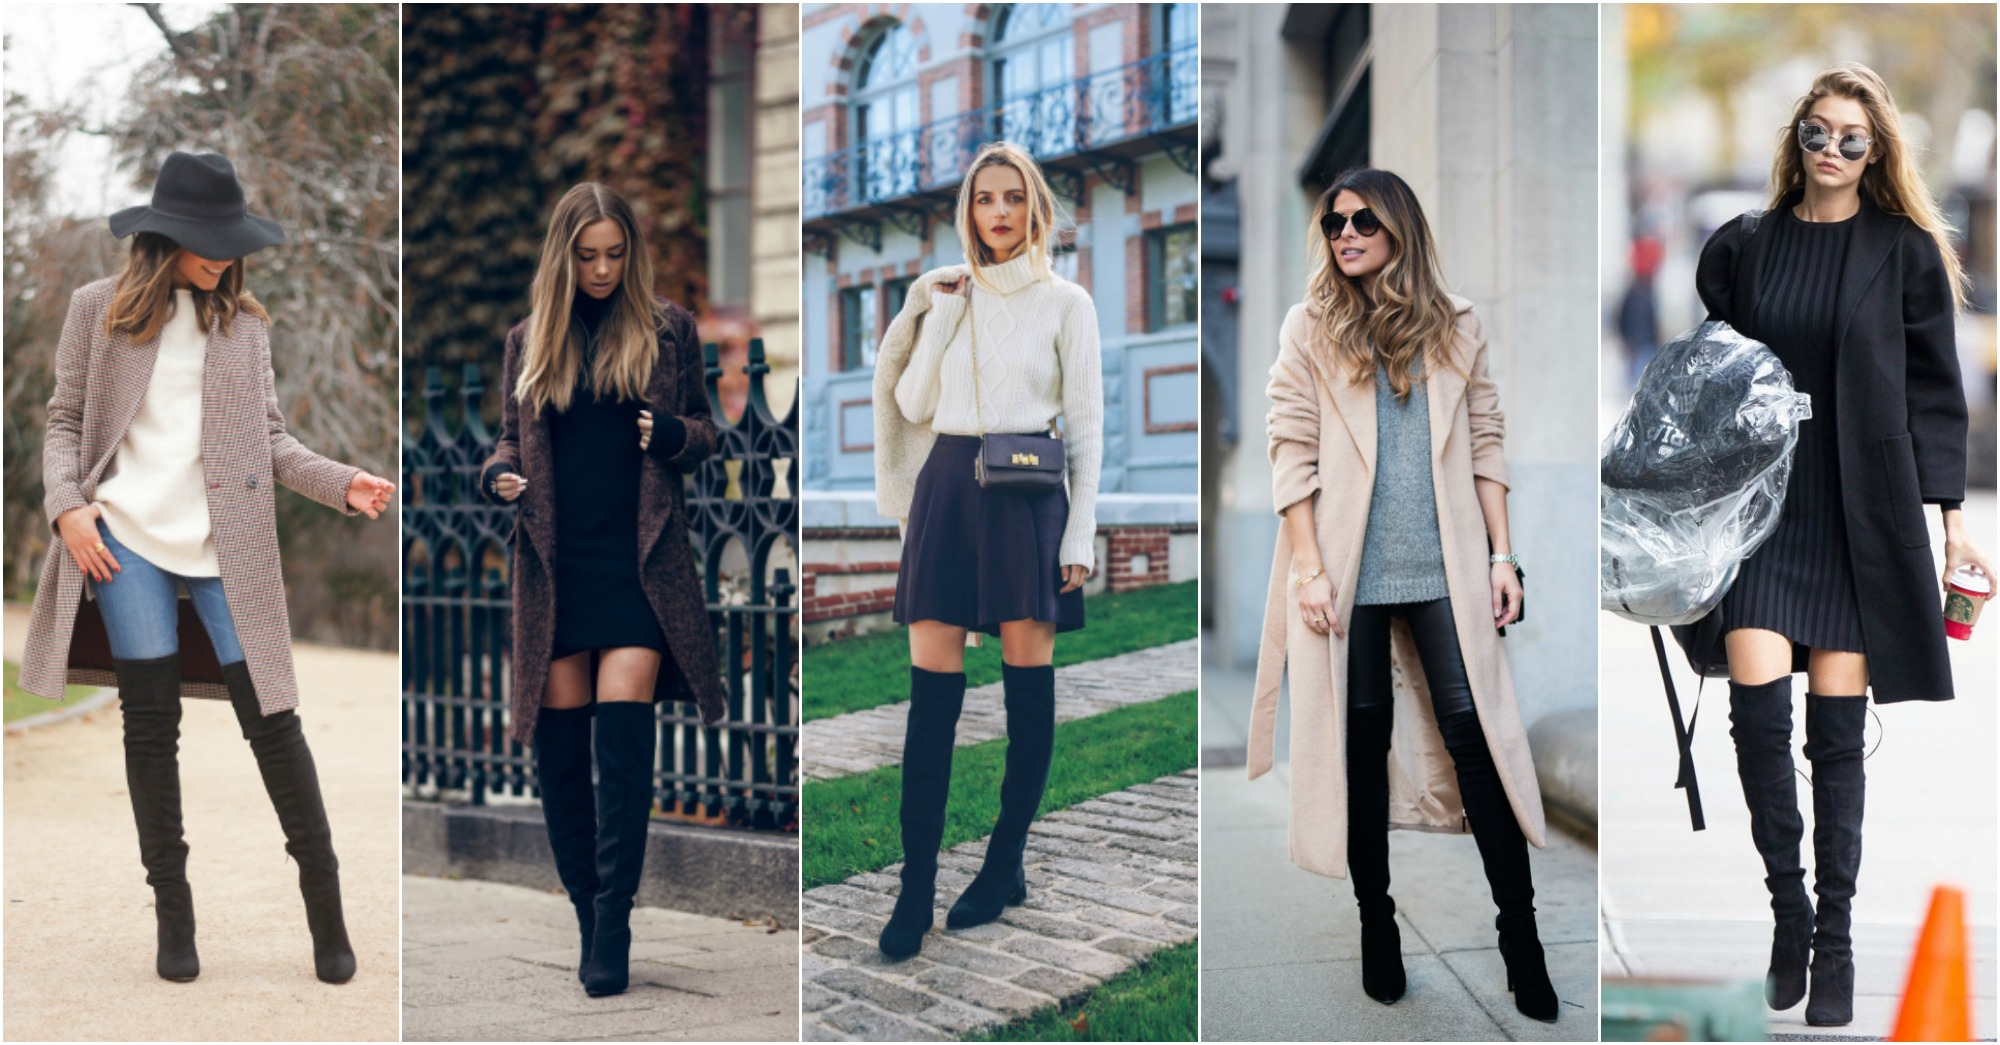 Everyone Is Wearing Black Over-The-Knee Boots - fashionsy.com